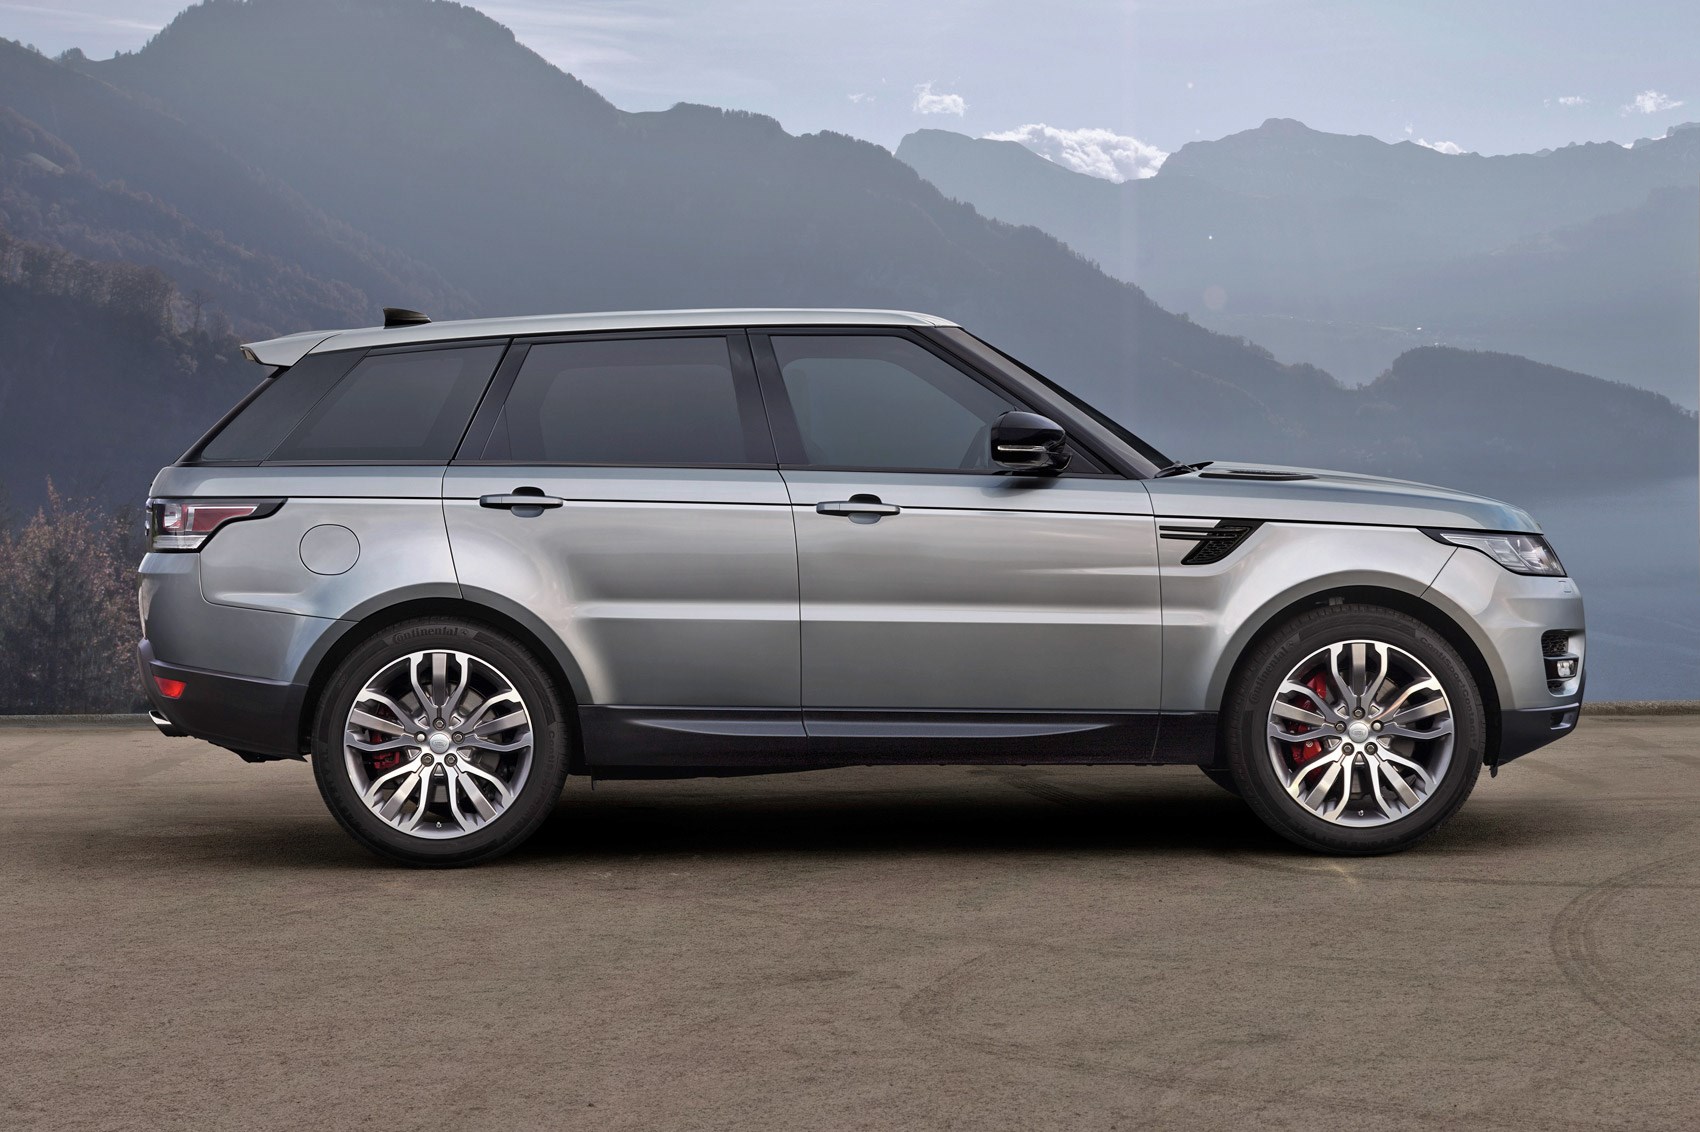 Diesel do nicely: updated 4cyl Range Rover Sport revealed for 2017